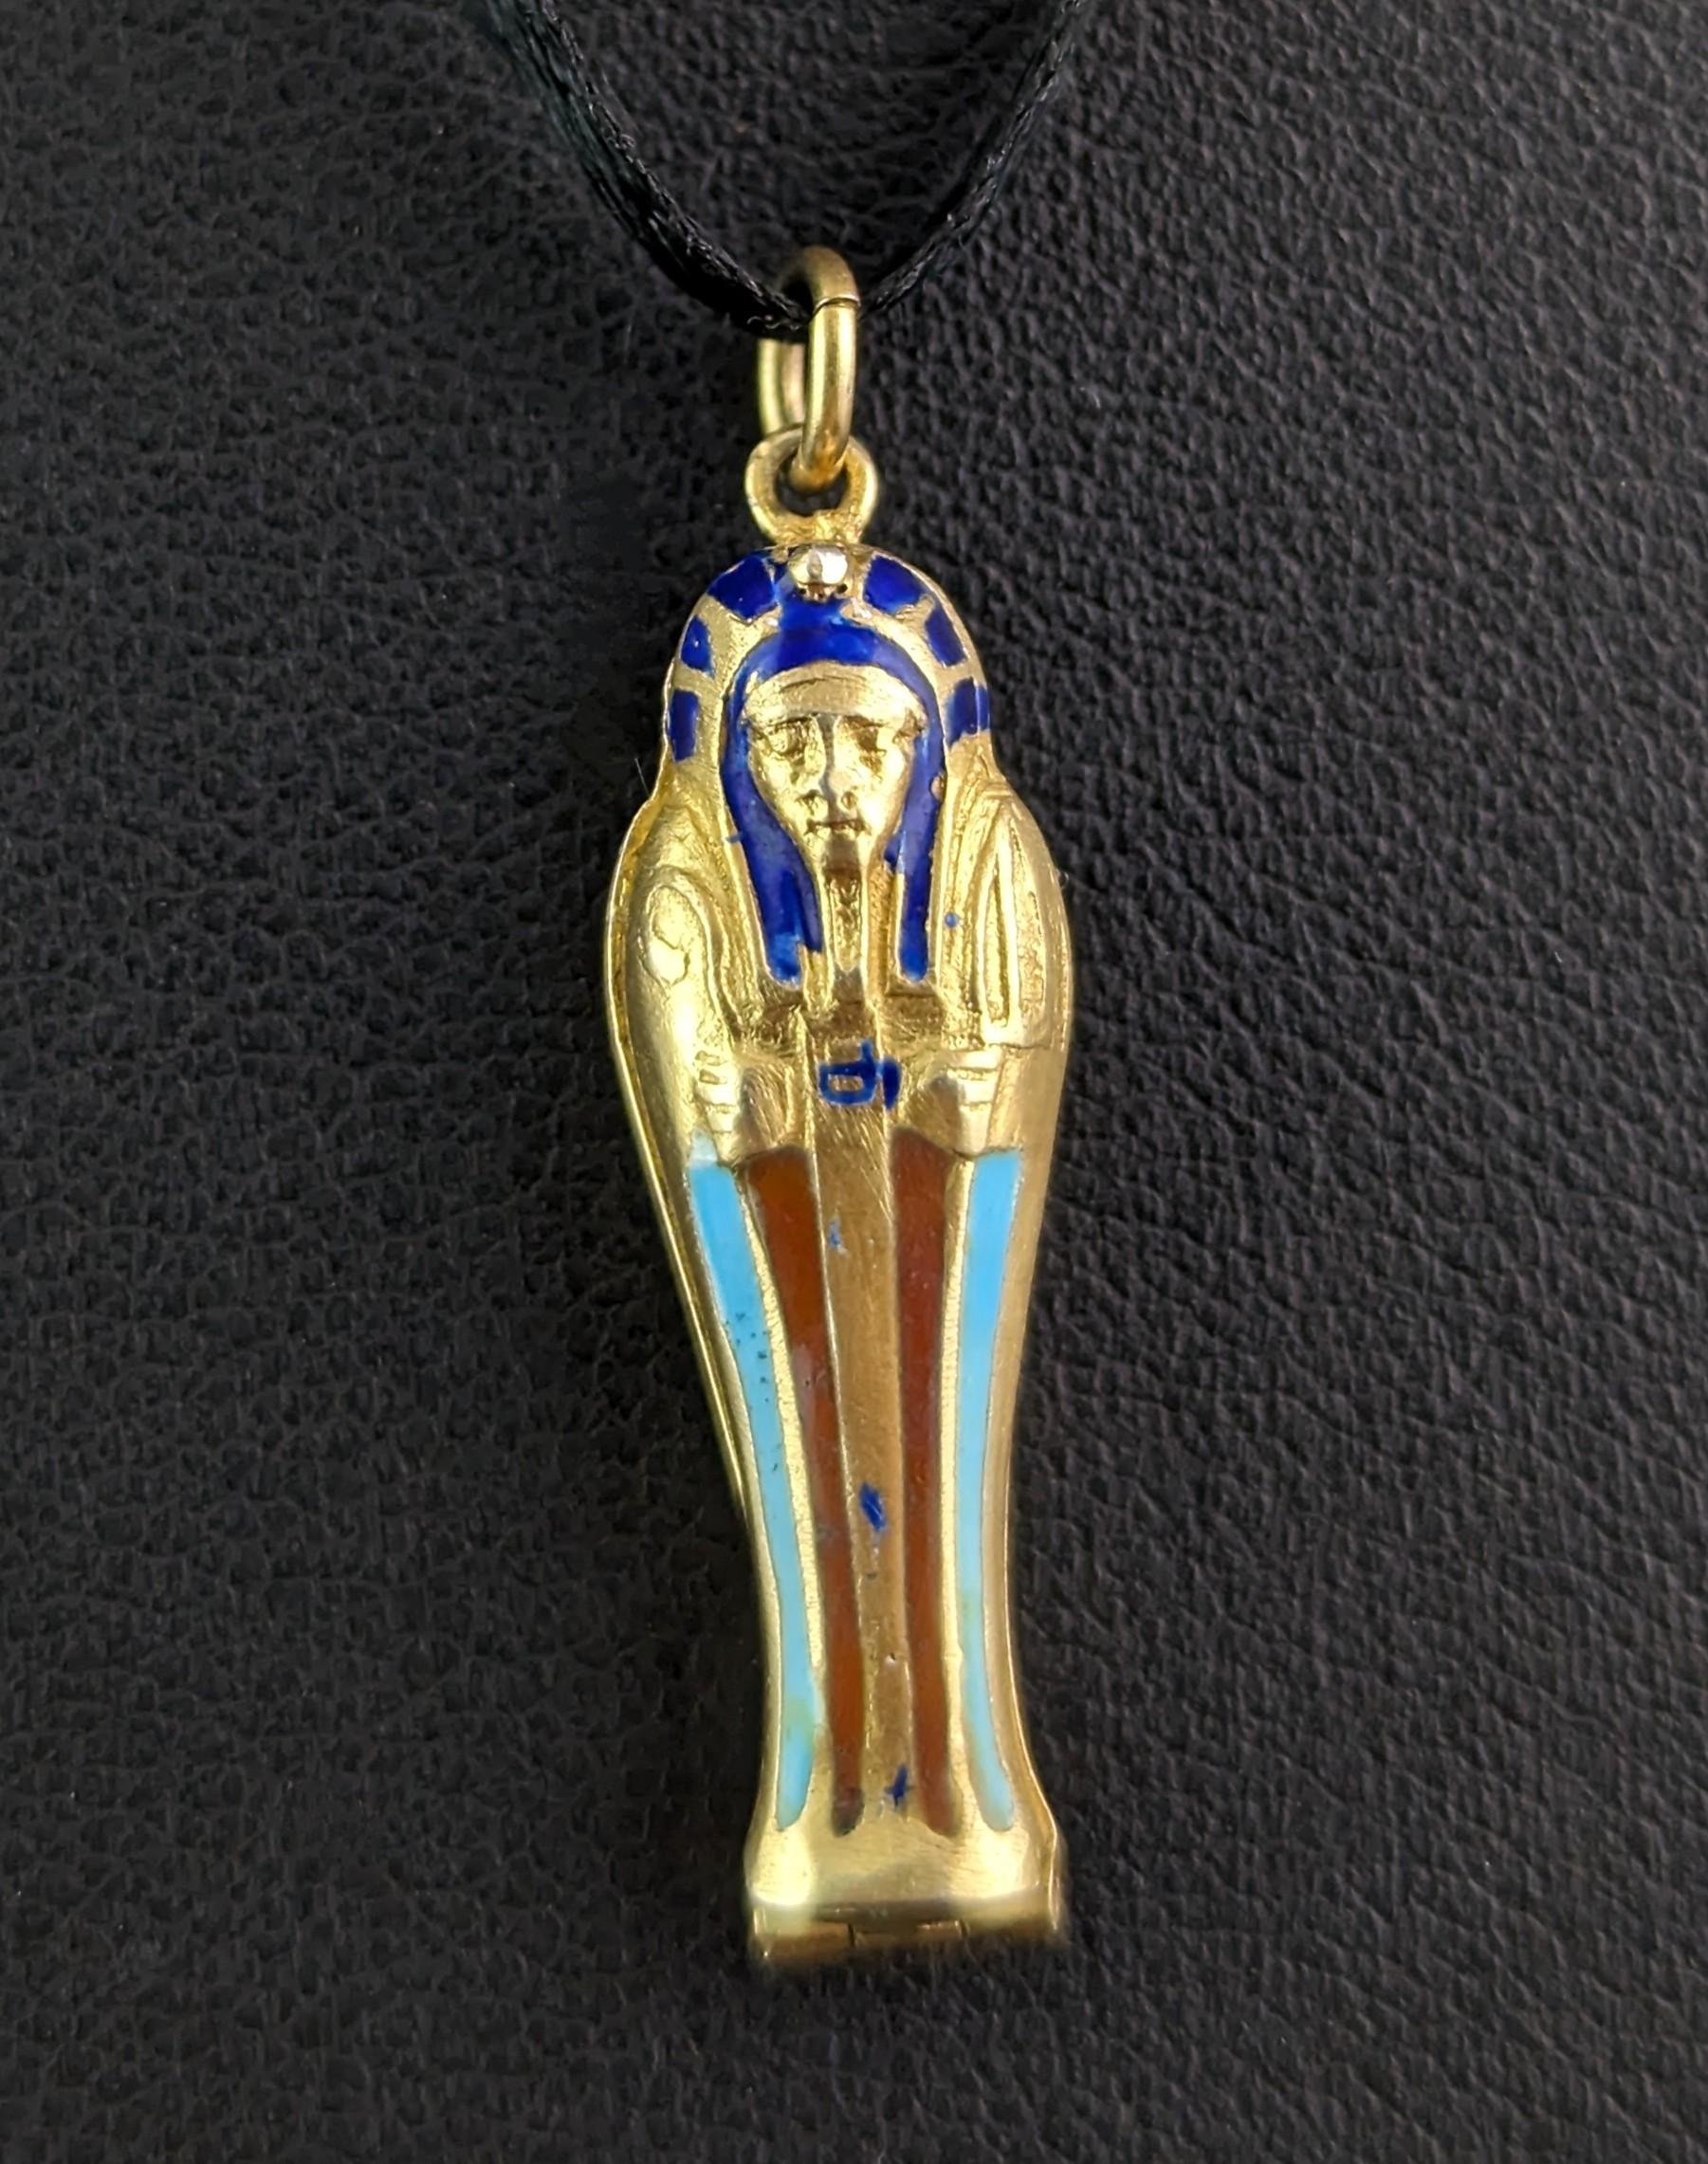 A fun vintage Art Deco silver gilt and enamel sarcophagus pendant.

A relic of the Egyptian revival era in the 1920s when everything Egyptian was the height of fashion and wonder.

This vintage silver gilt pendant is a rich golden gilt in 800 silver